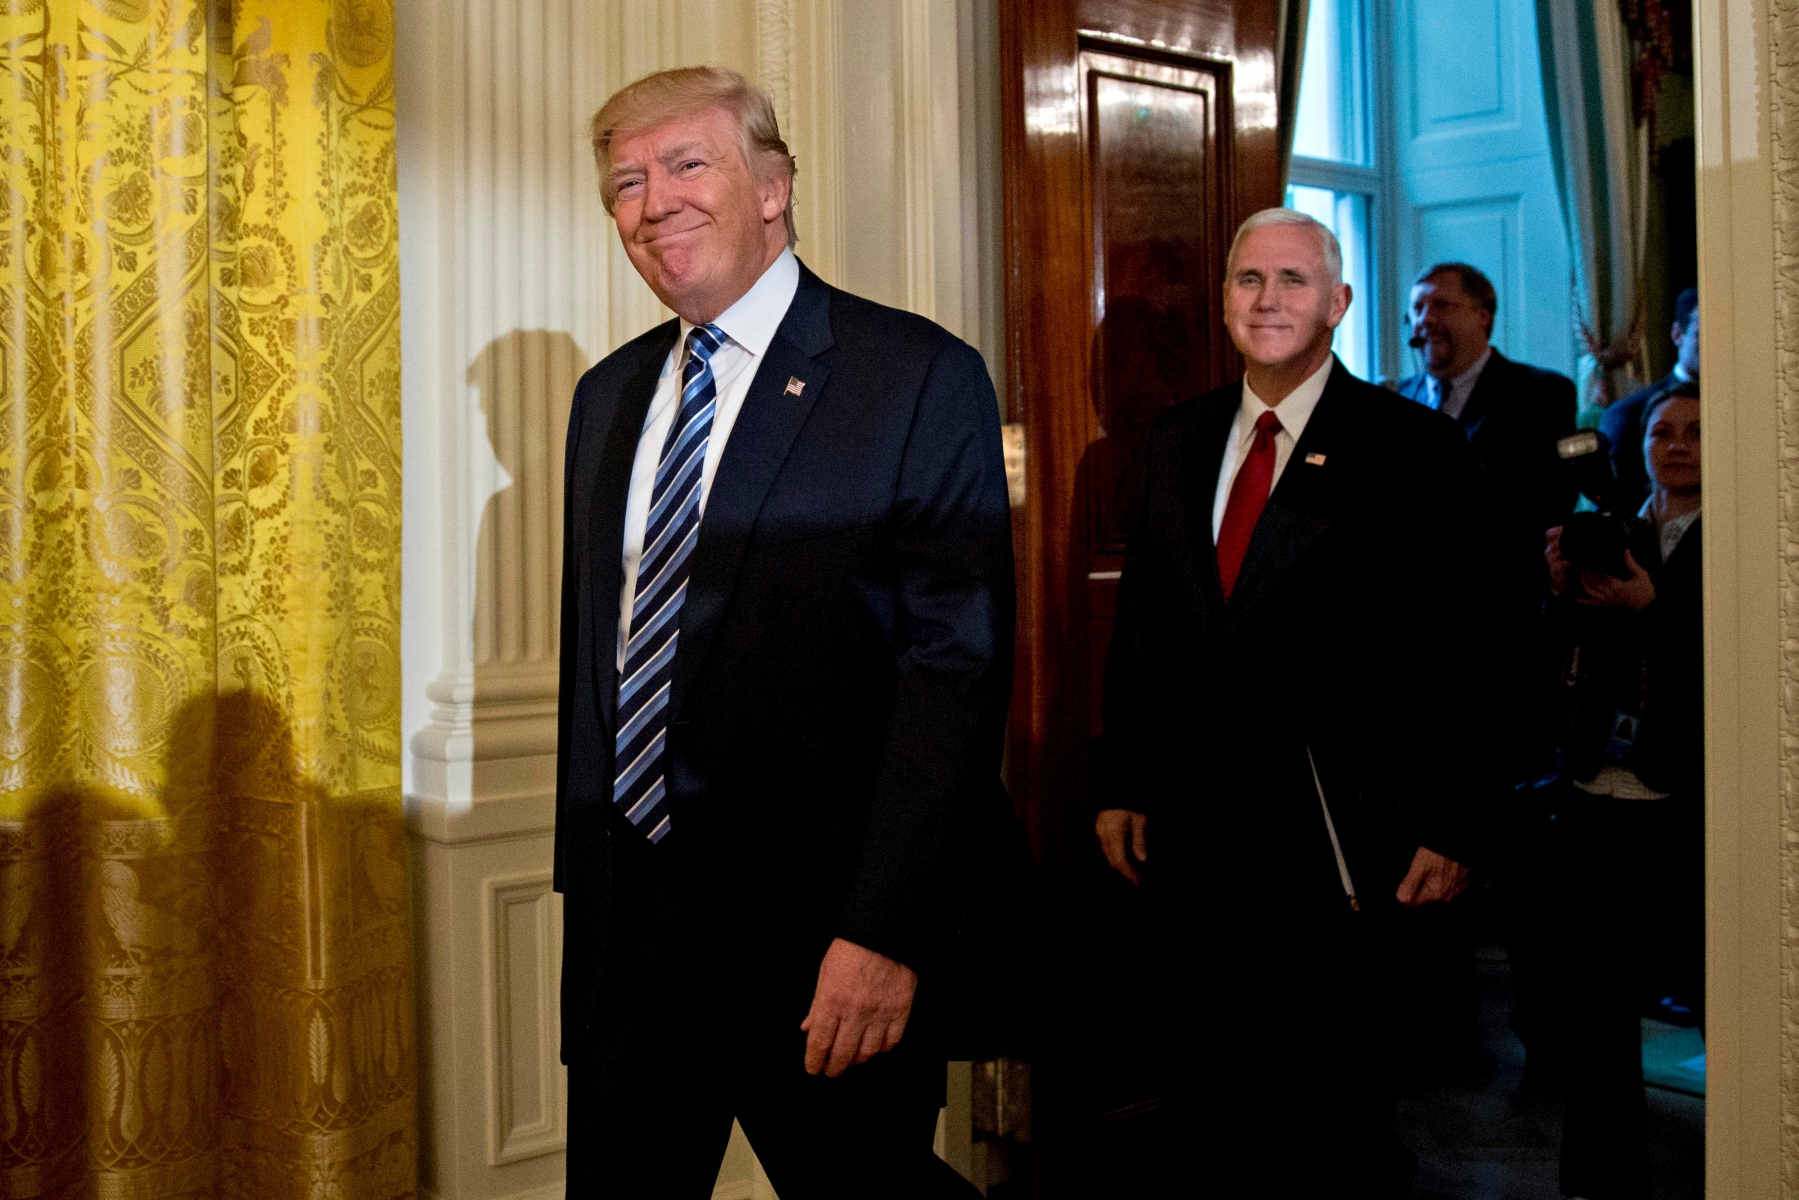 epa05742773 US President Donald Trump, left, and US Vice President Mike Pence arrive to a swearing in ceremony of White House senior staff in the East Room of the White House in Washington, DC, USA, on 22 January 2017.  EPA/Andrew Harrer / POOL USA TRUMP EAST ROOM